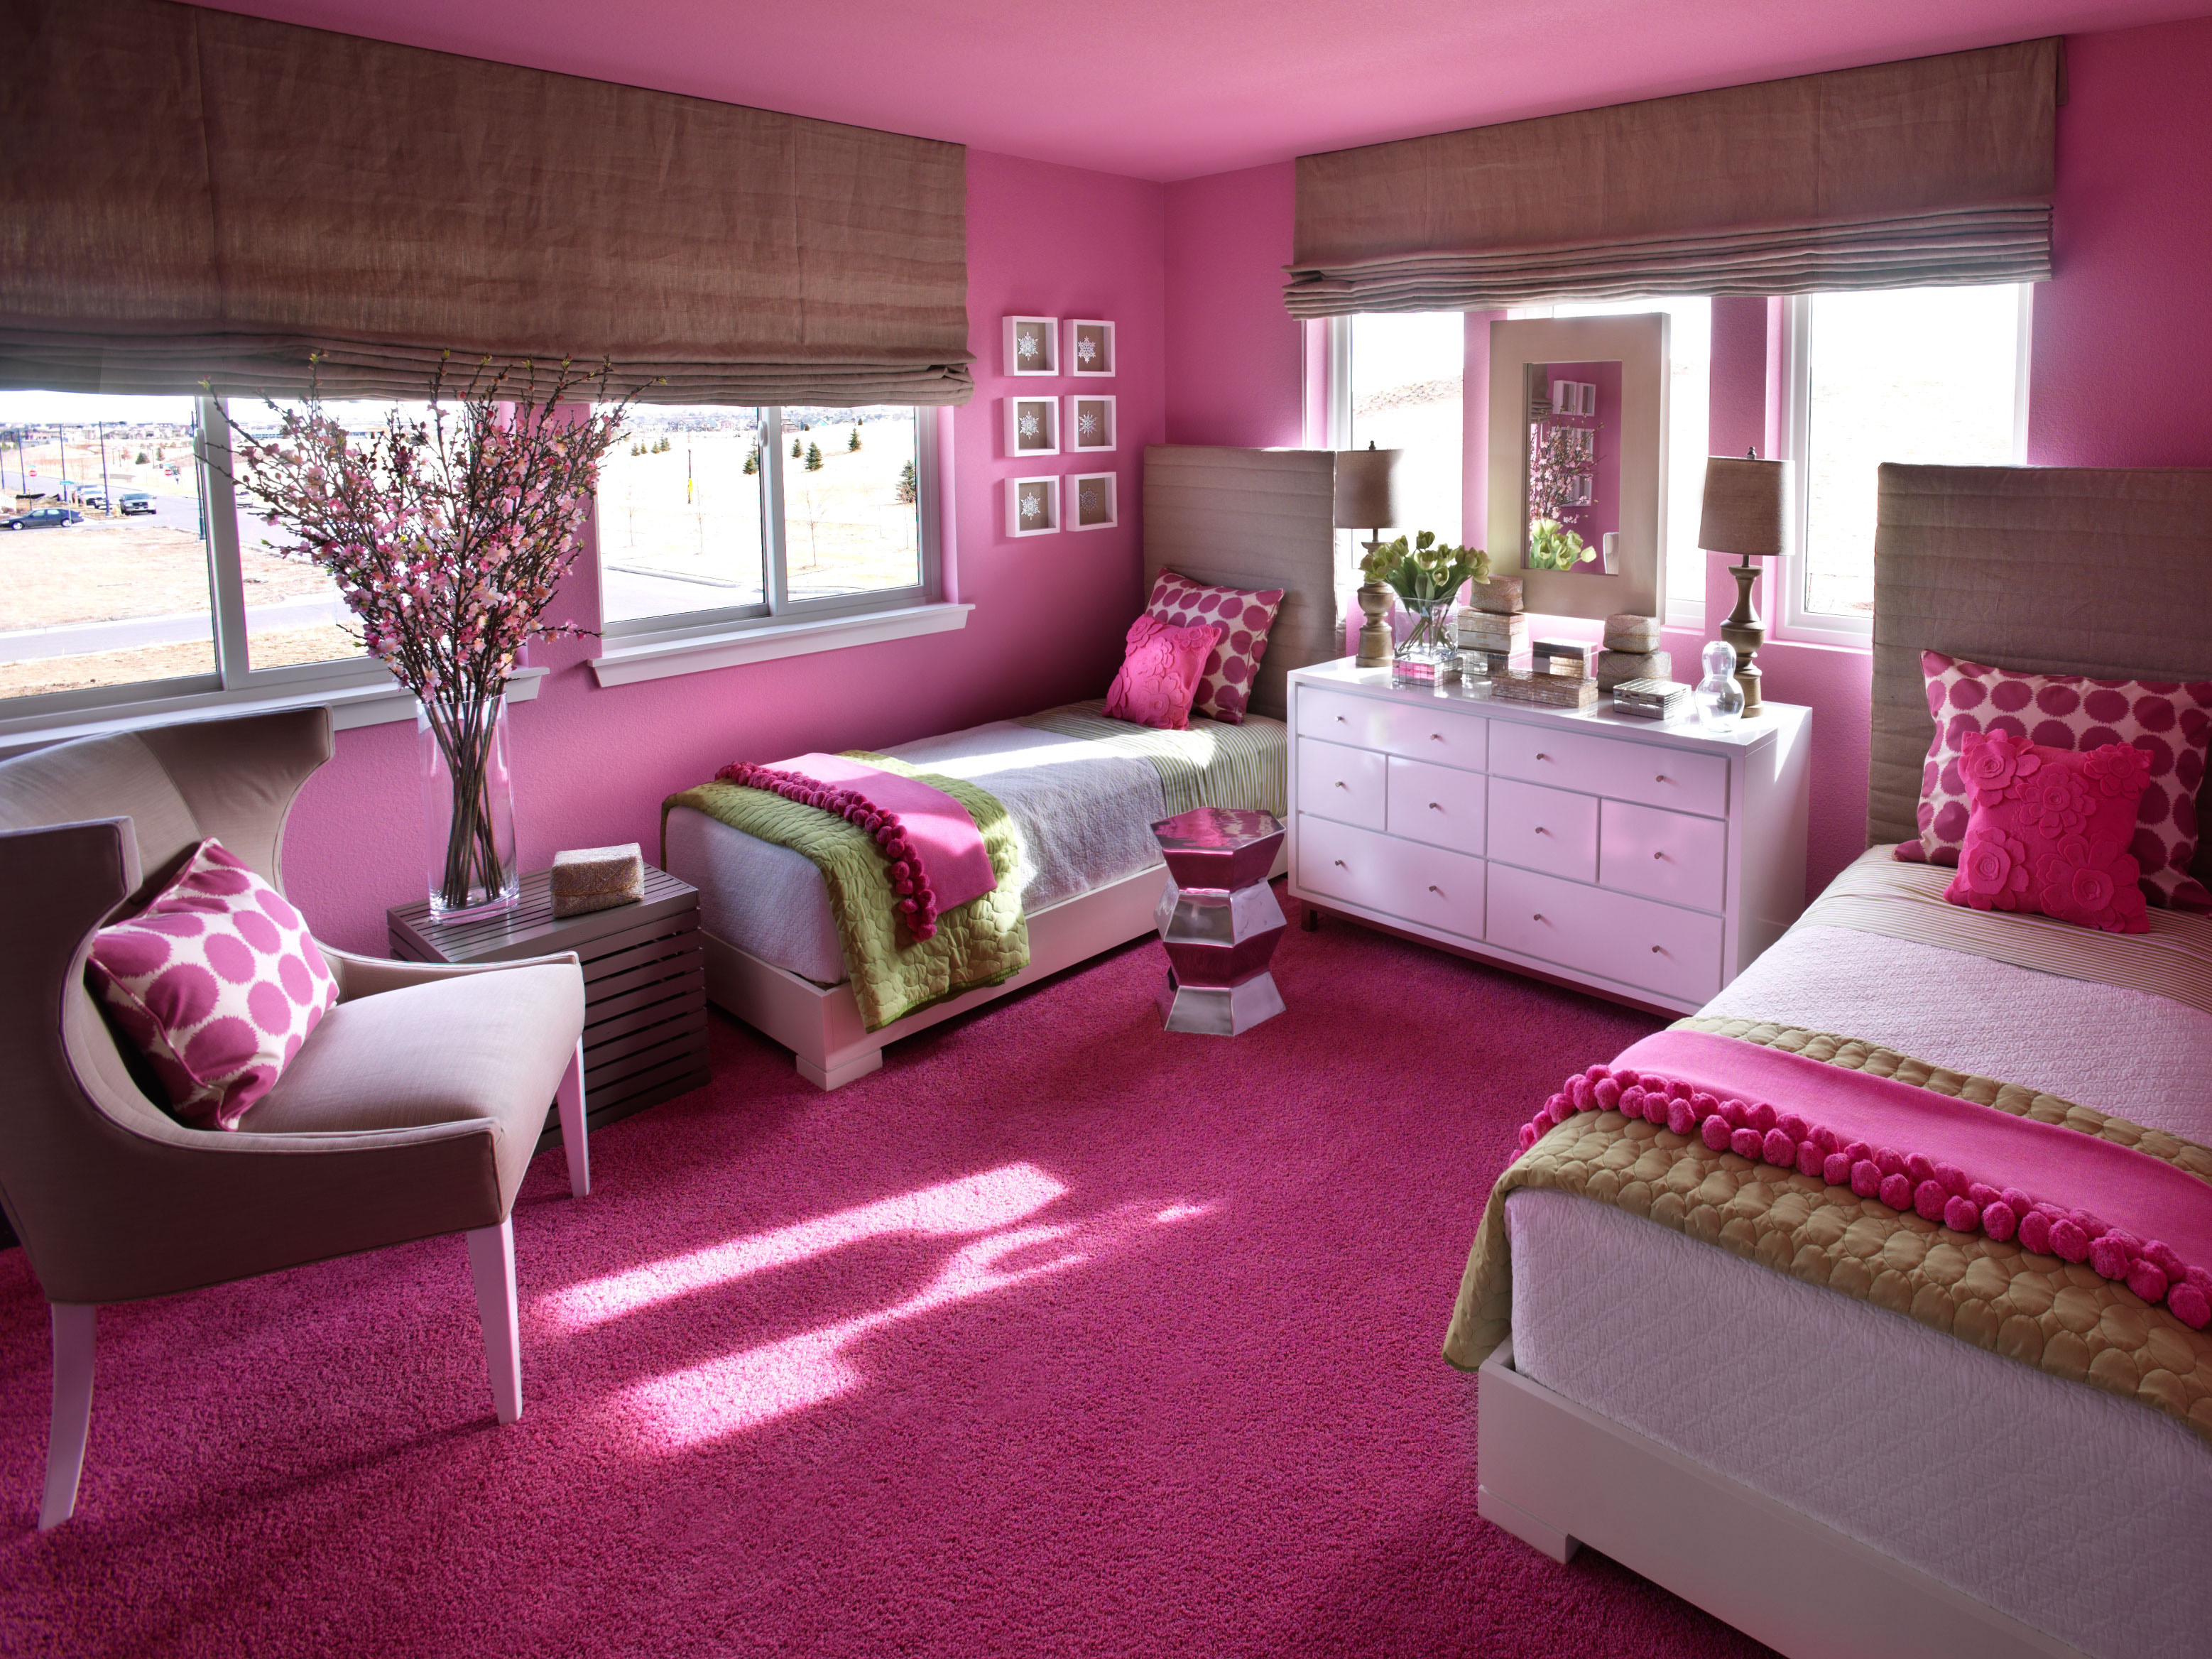 Girls Bedroom Color Schemes Pictures Options Ideas Home Room From intended for sizing 3115 X 2336